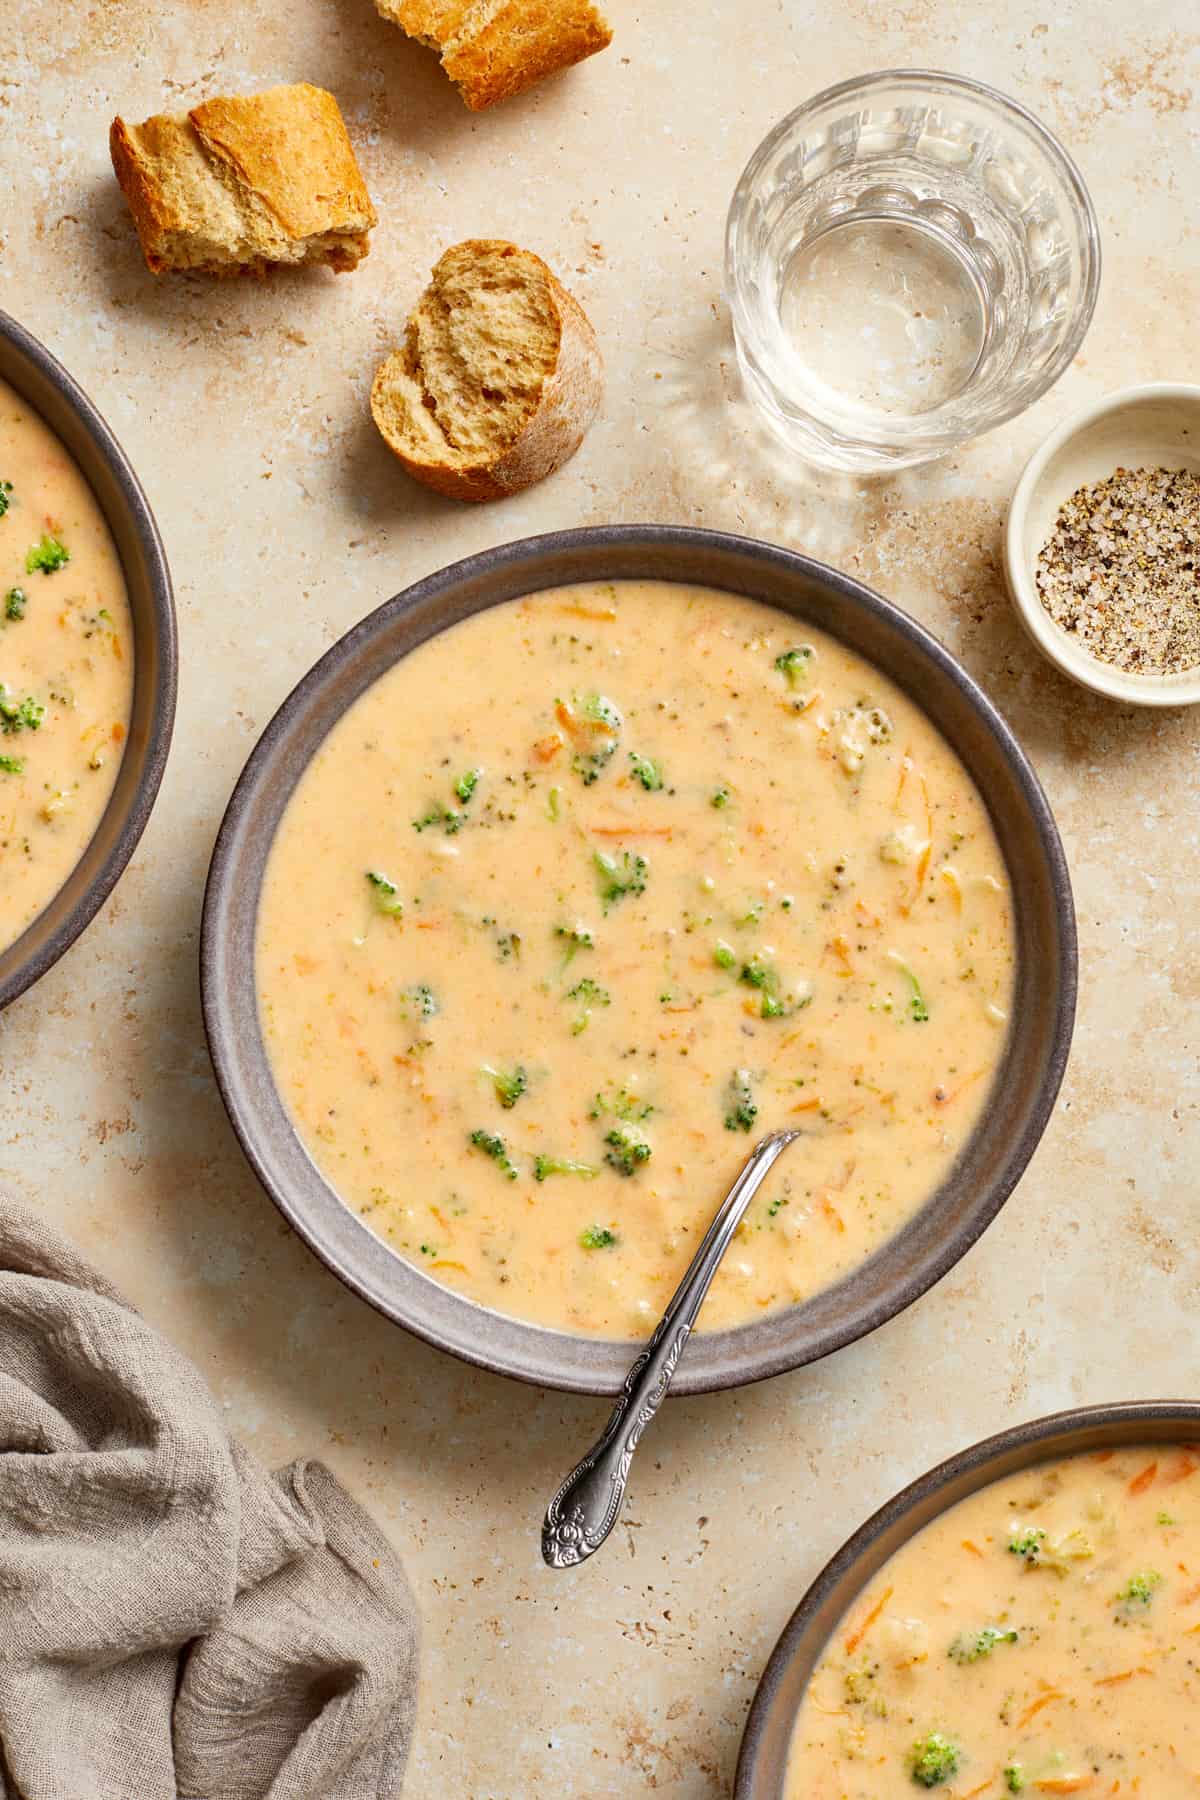 Bowl of broccoli and cheese soup with spoon surrounded by glass with water, pieces of bread and other bowls of soup.